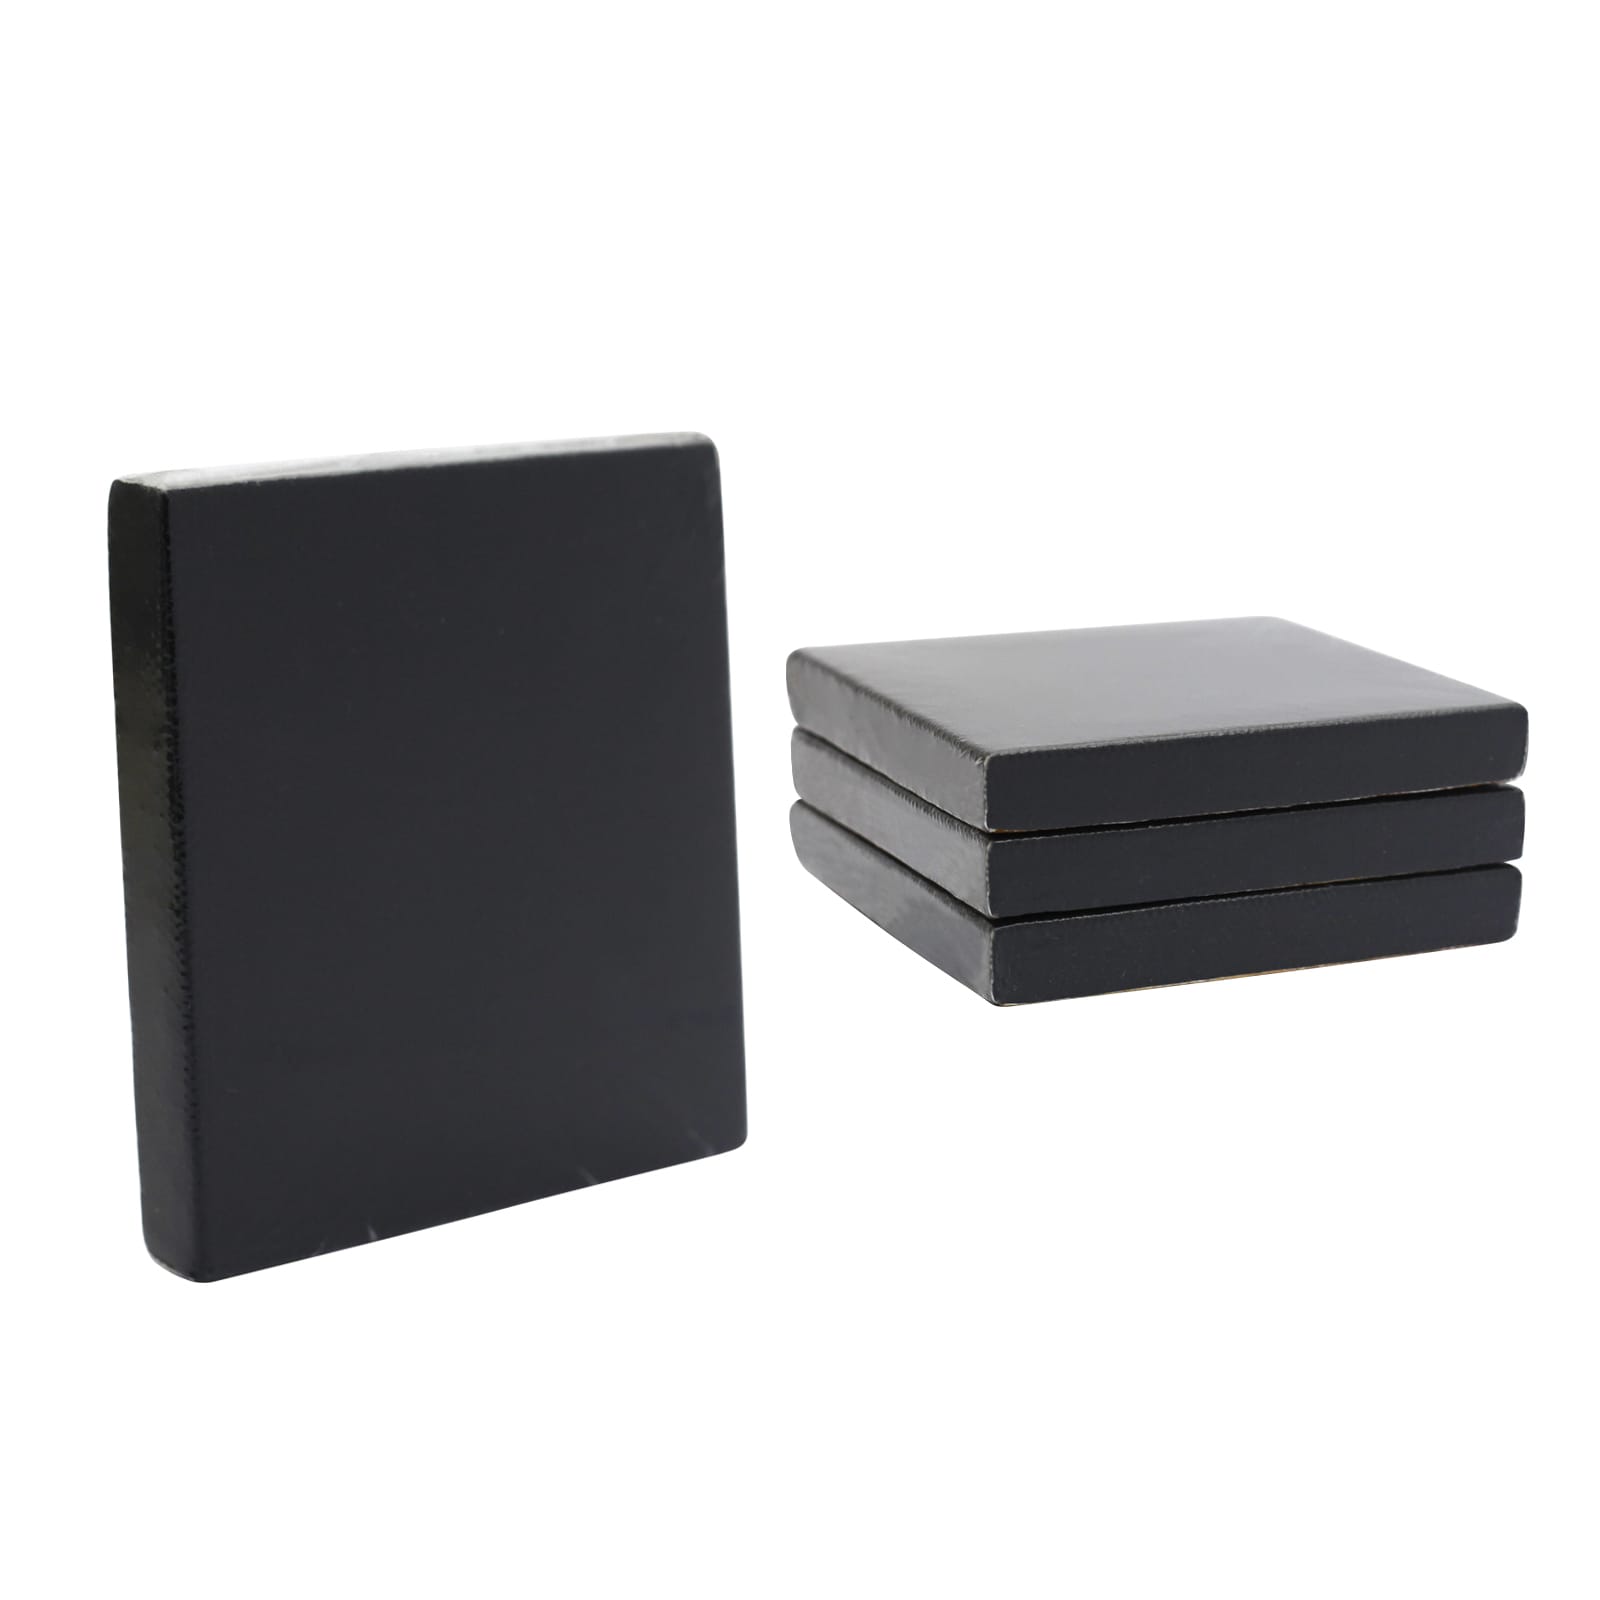 12 Packs: 2 ct. (24 total) Black Canvas Value Pack by Artist's Loft™  Necessities™